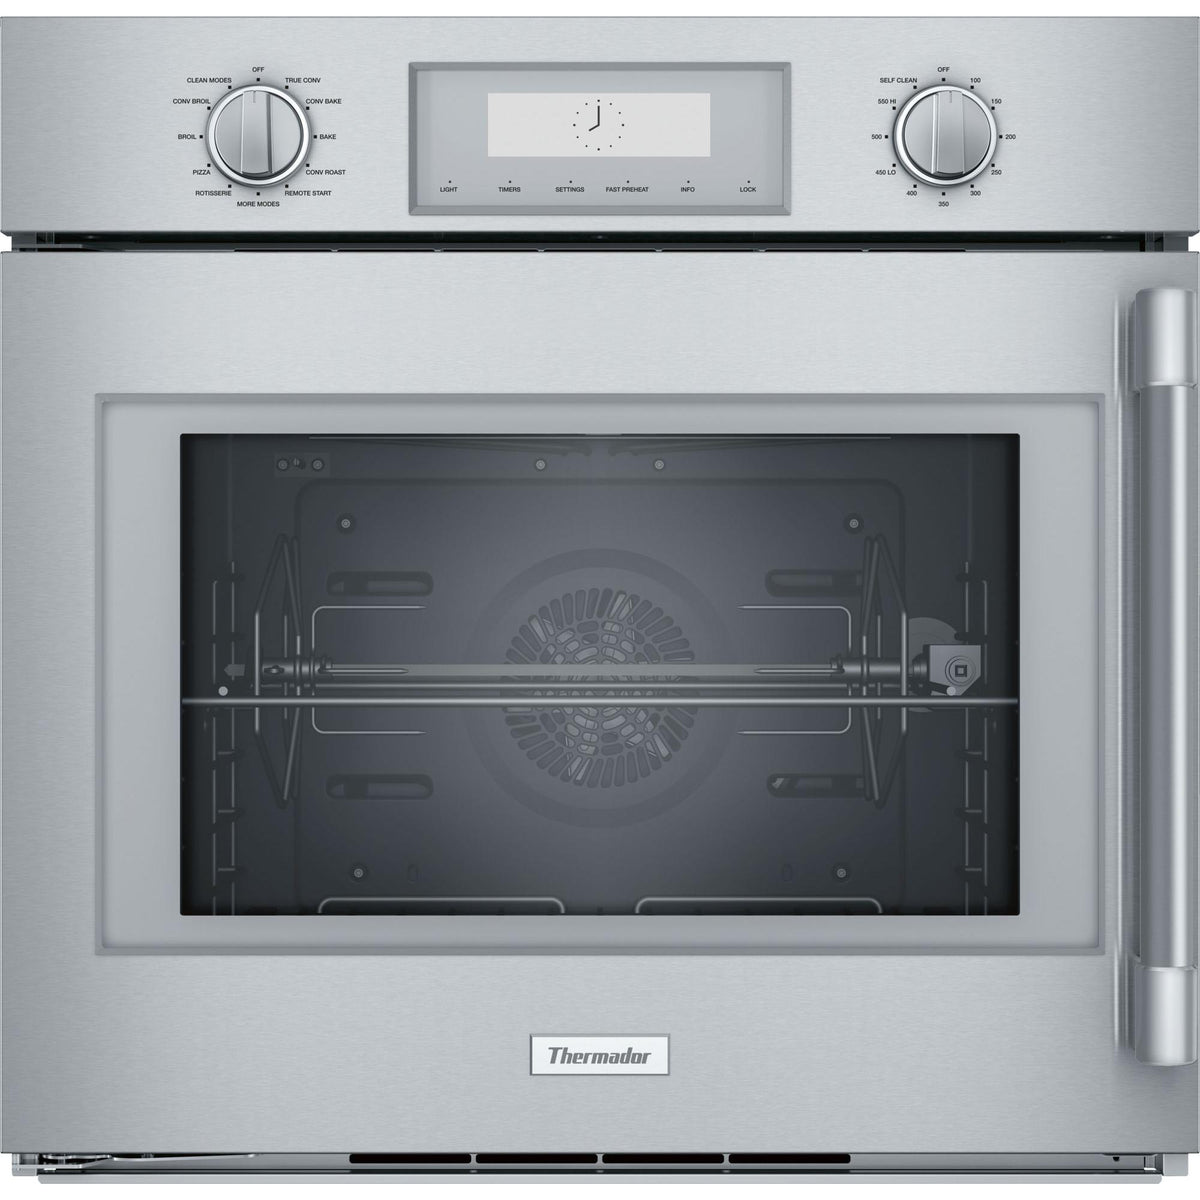 Thermador 30-inch, 4.5 cu.ft. Built-in Single Wall Oven with Convection POD301LW IMAGE 1